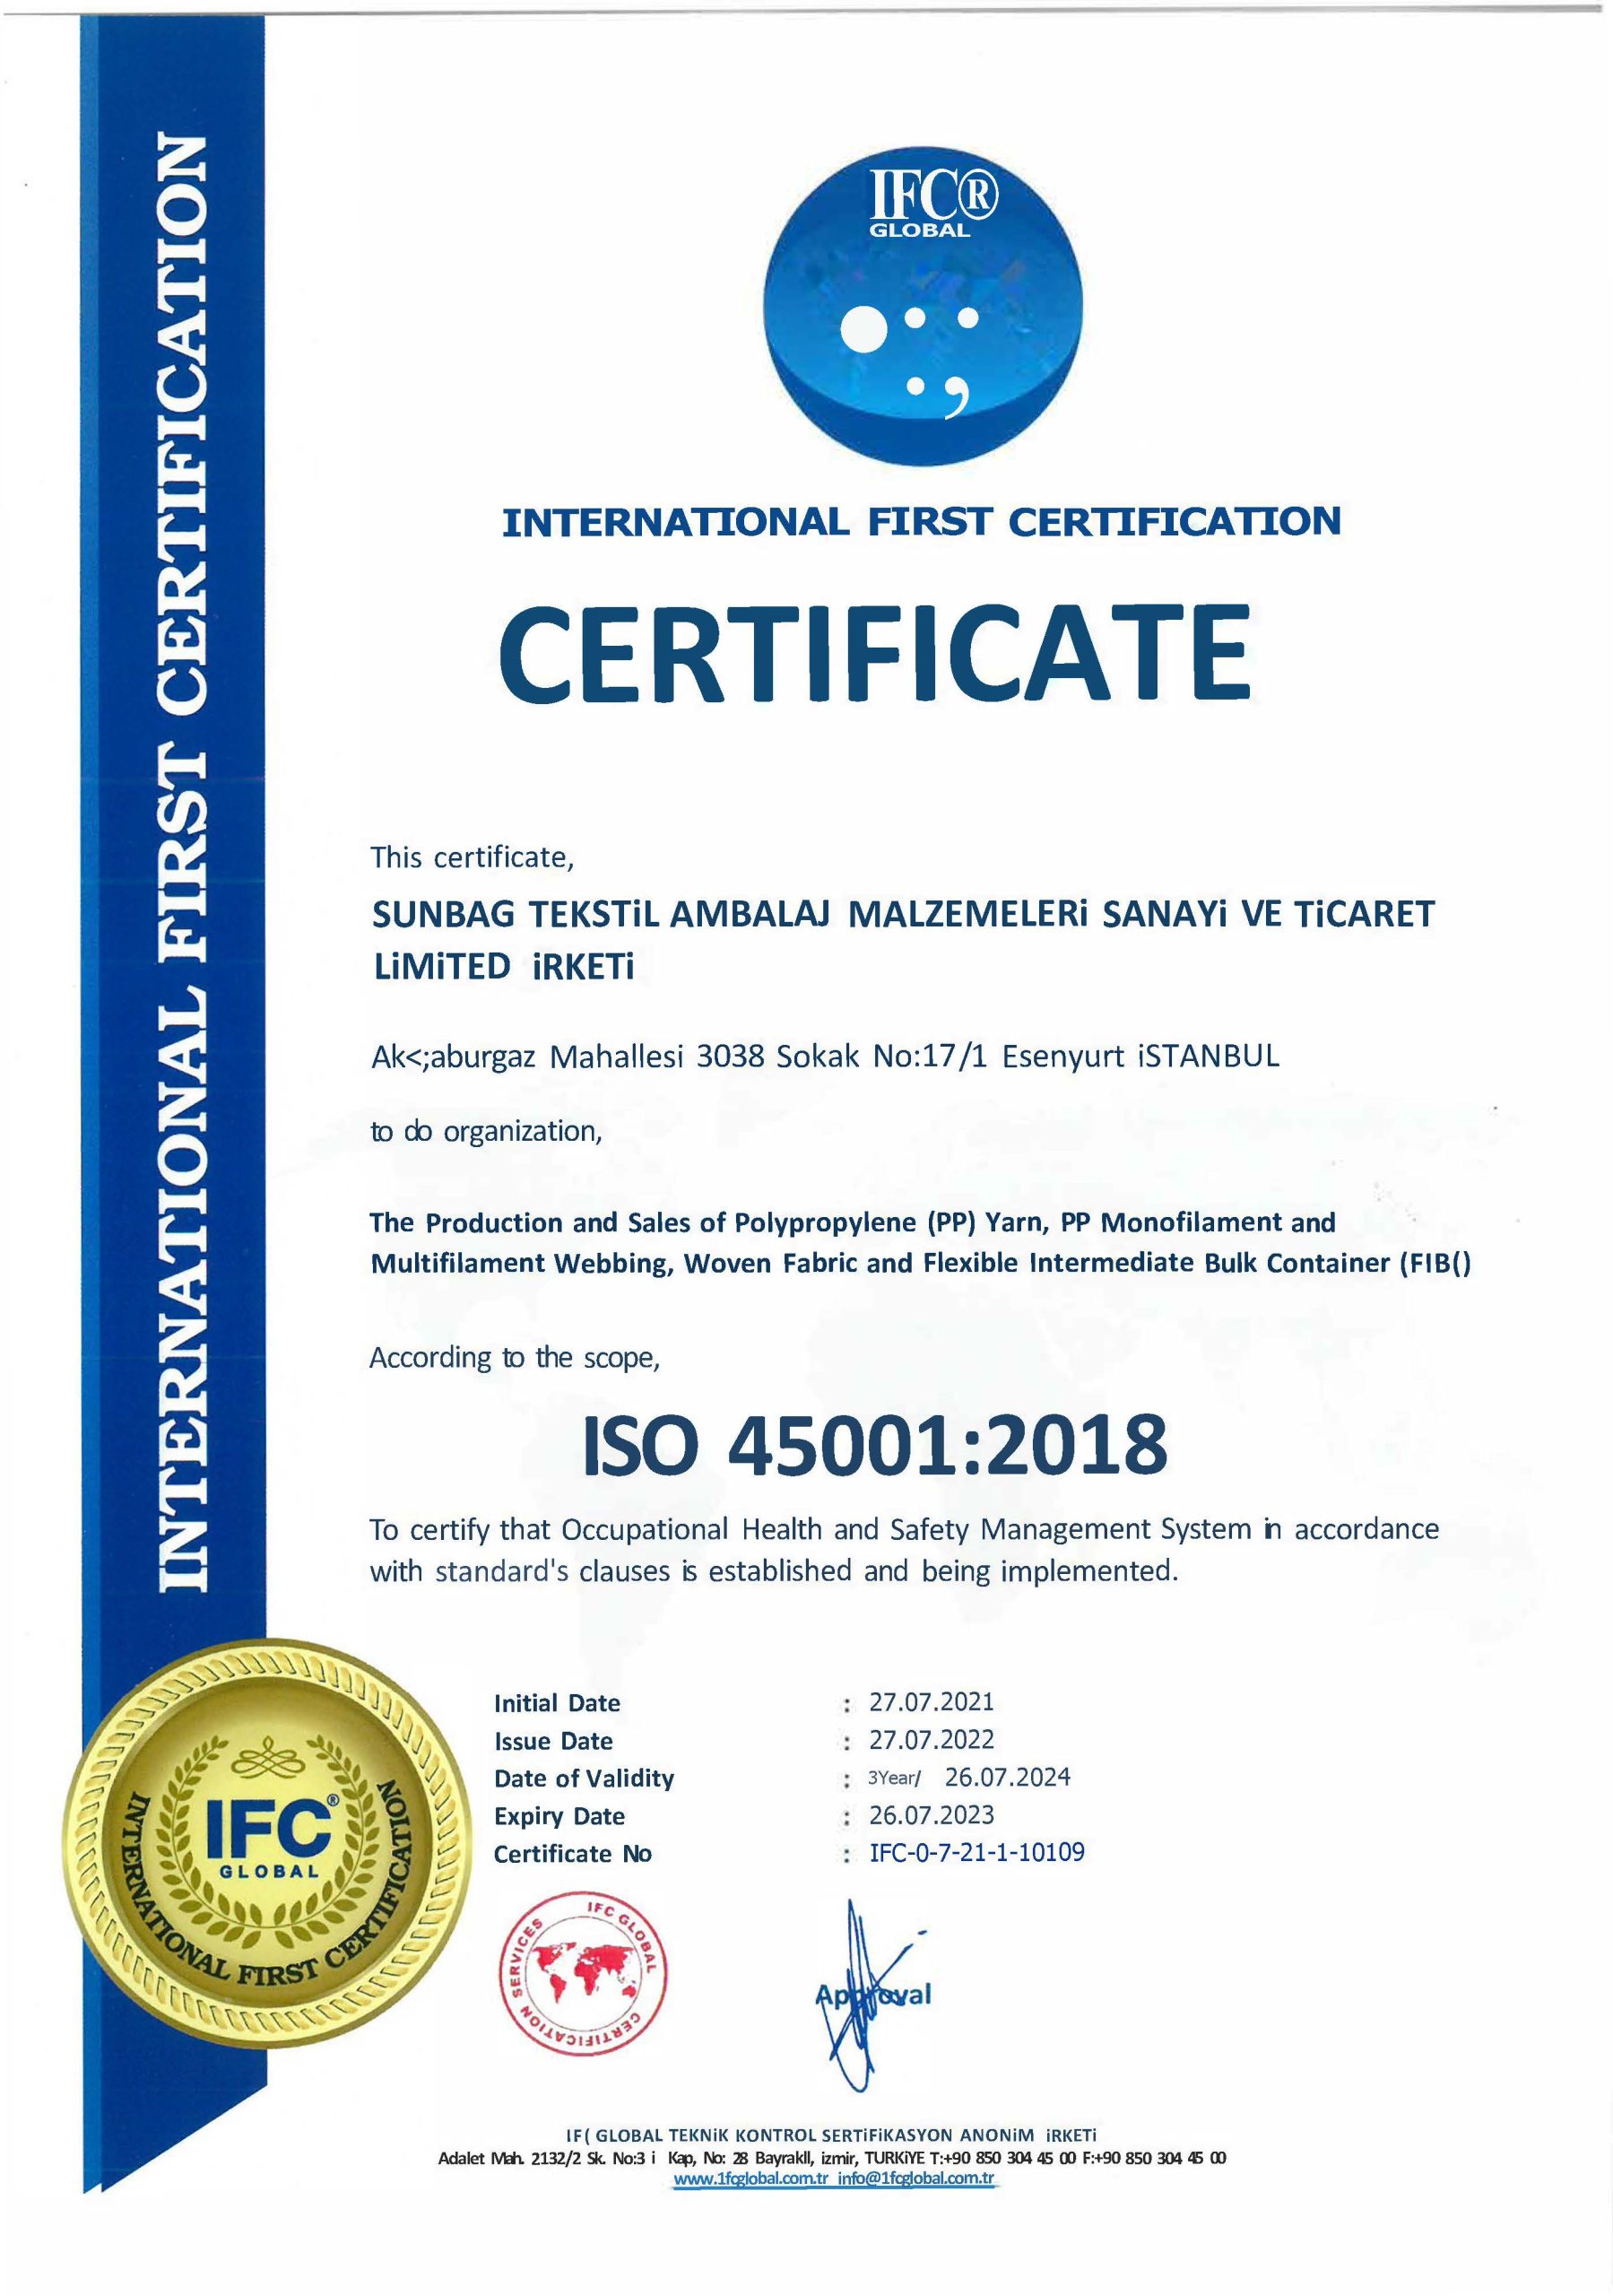 264-iso-45001-2018-occupational-health-and-safety-management-system